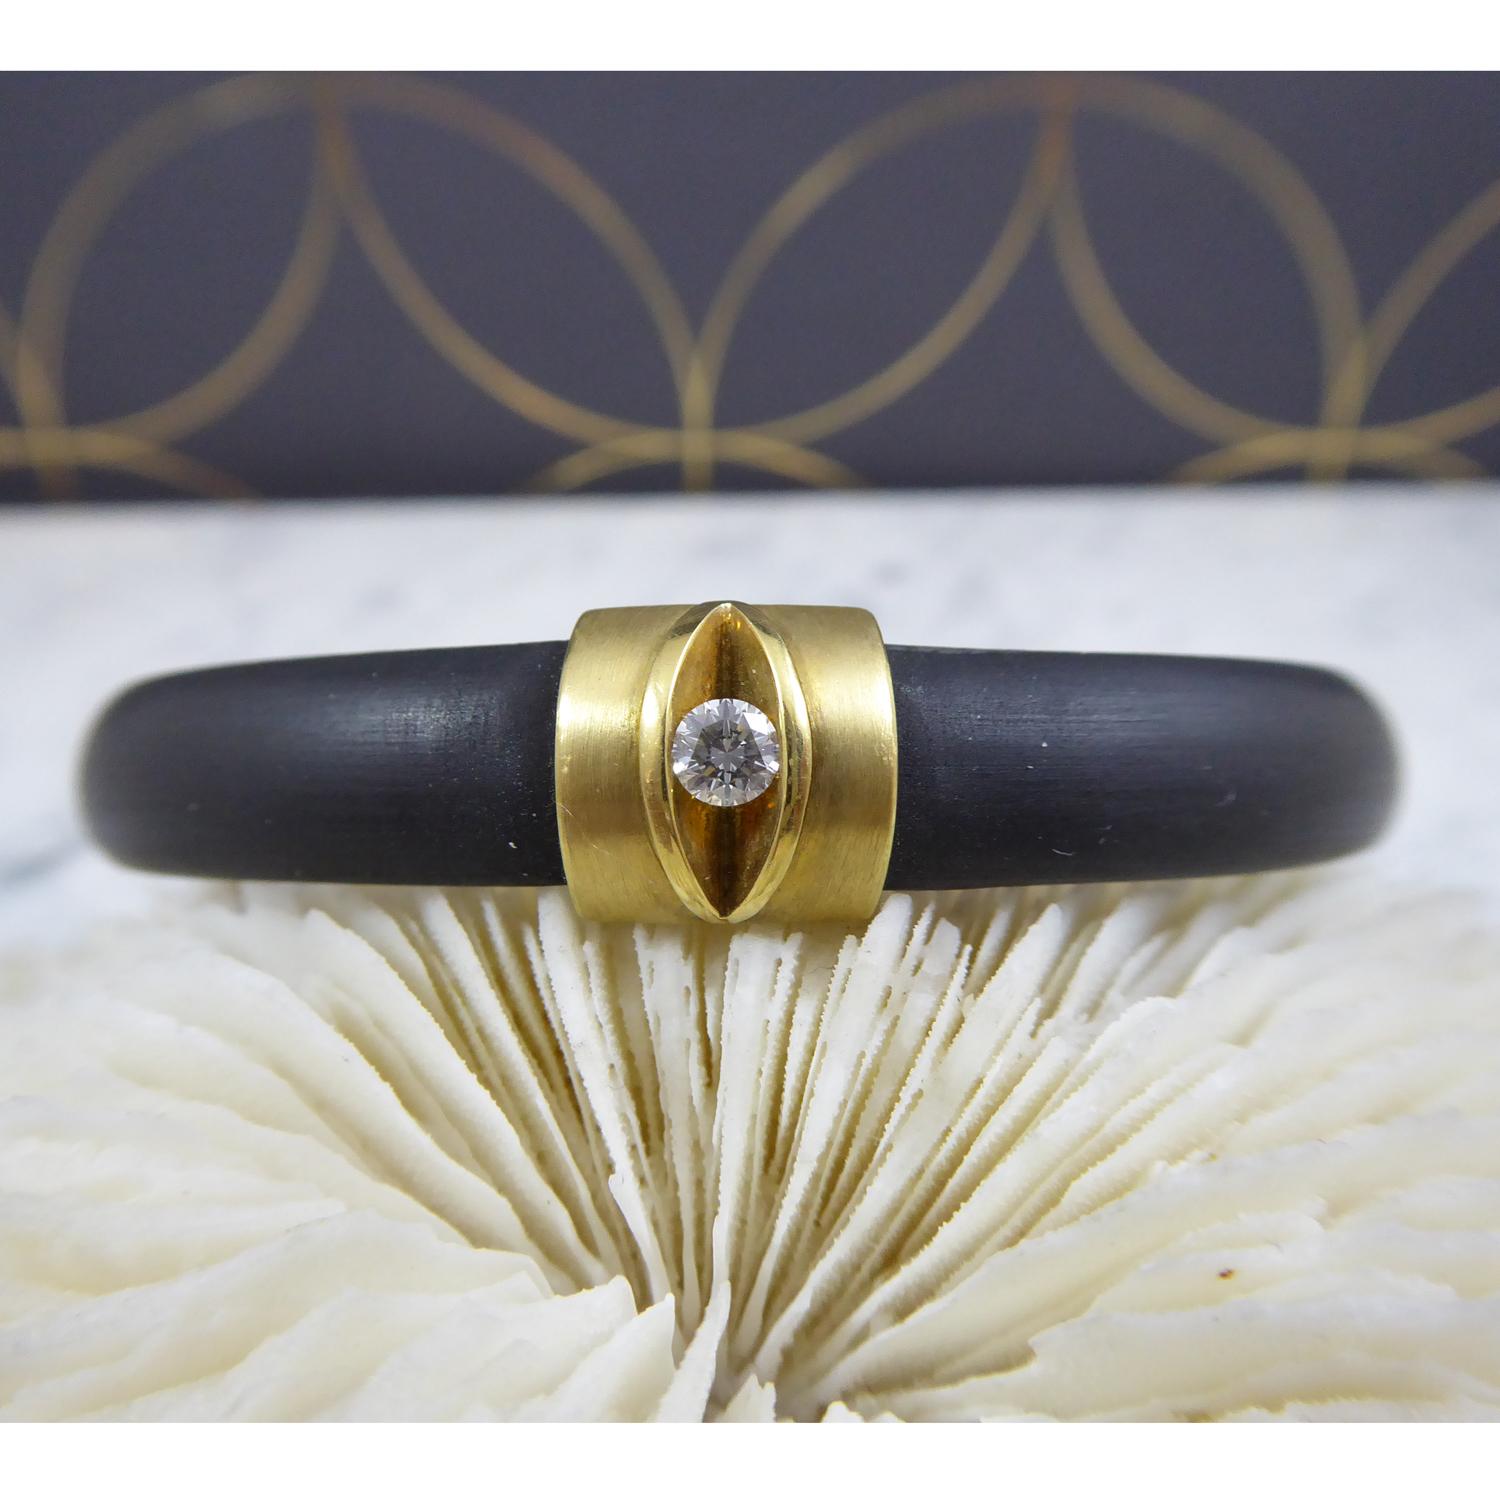 Fabulous directional design diamond bracelet by German jewellery designer, Bunz. Meticulous attention to detail with a black silicone band with a section of 18ct yellow gold. A 'slice' has been cut out of the gold section and a brilliant cut diamond